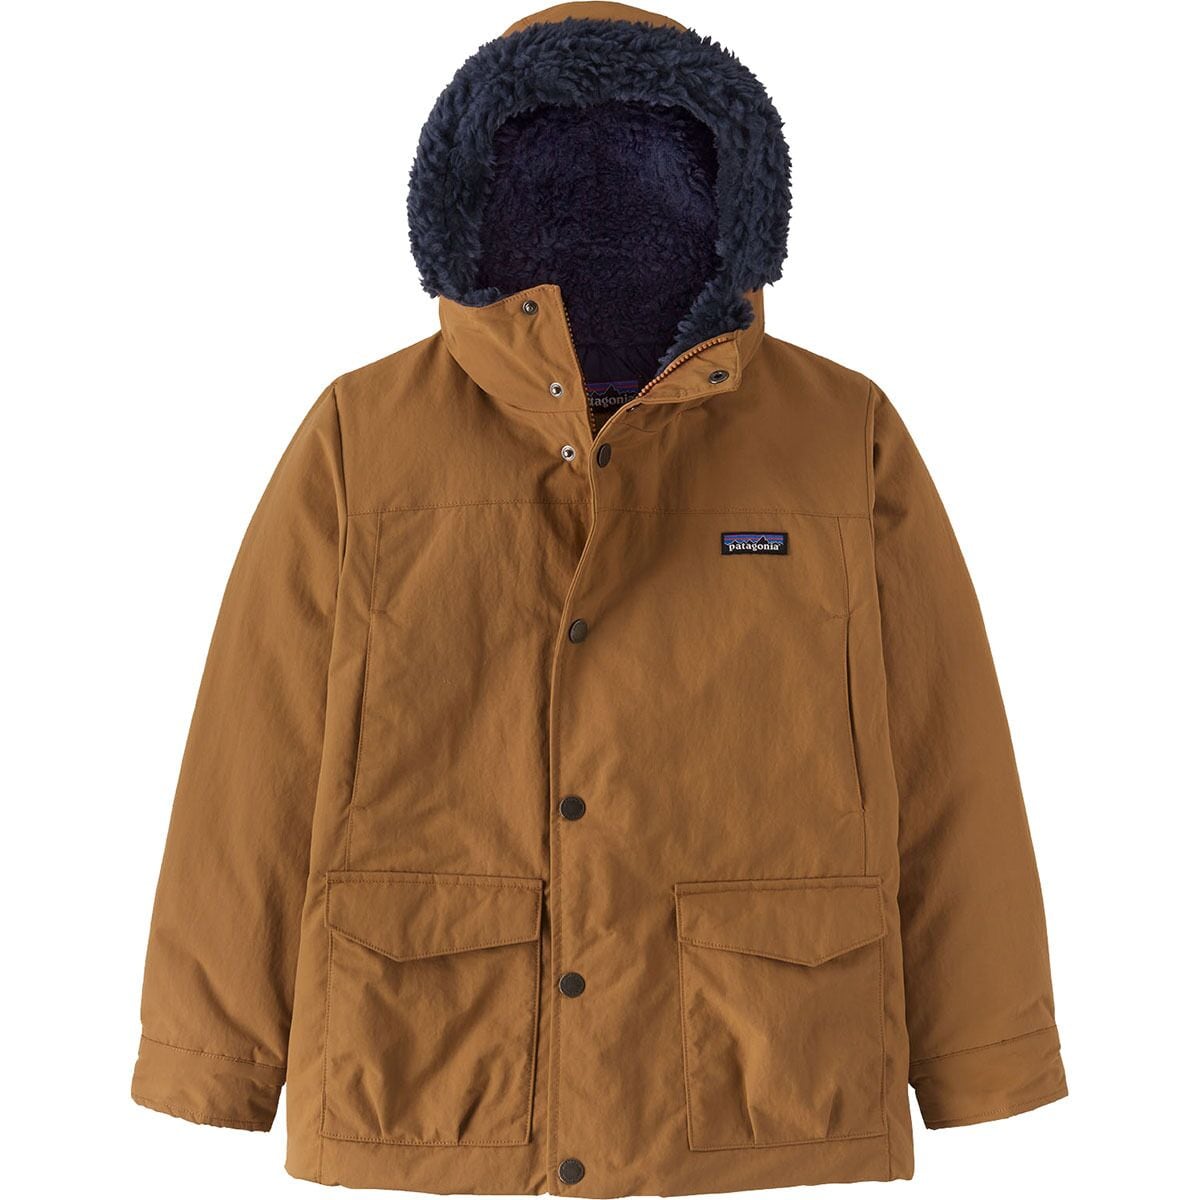 Patagonia Insulated Isthmus Jacket - Kids